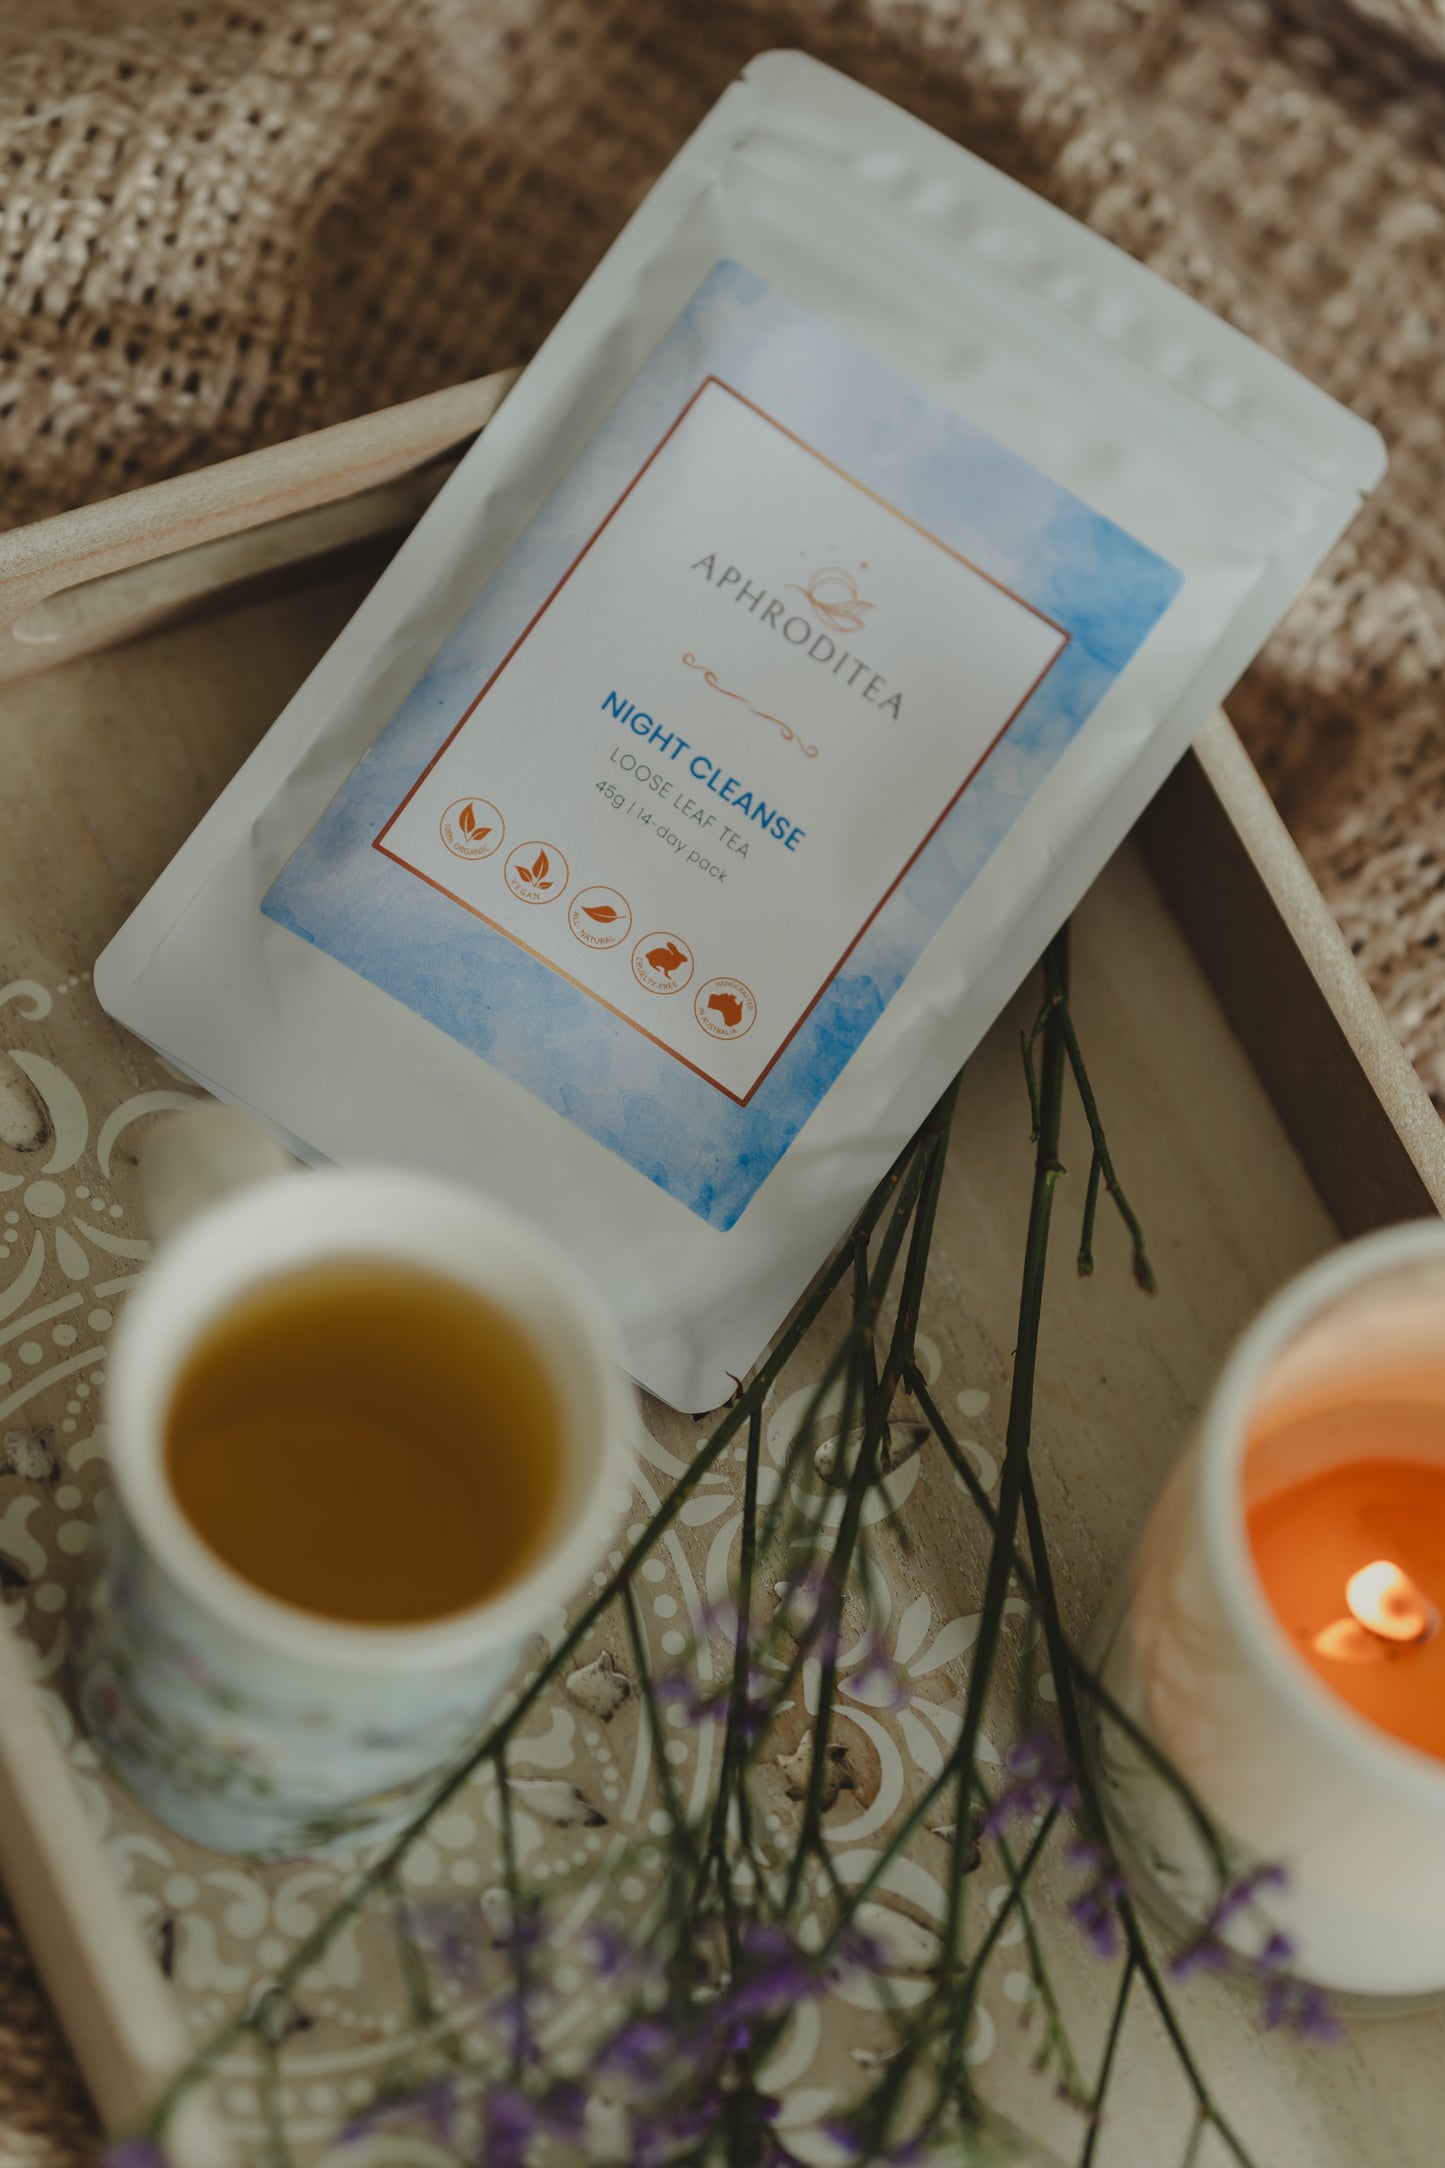 14 Day- Night Cleanse Tea